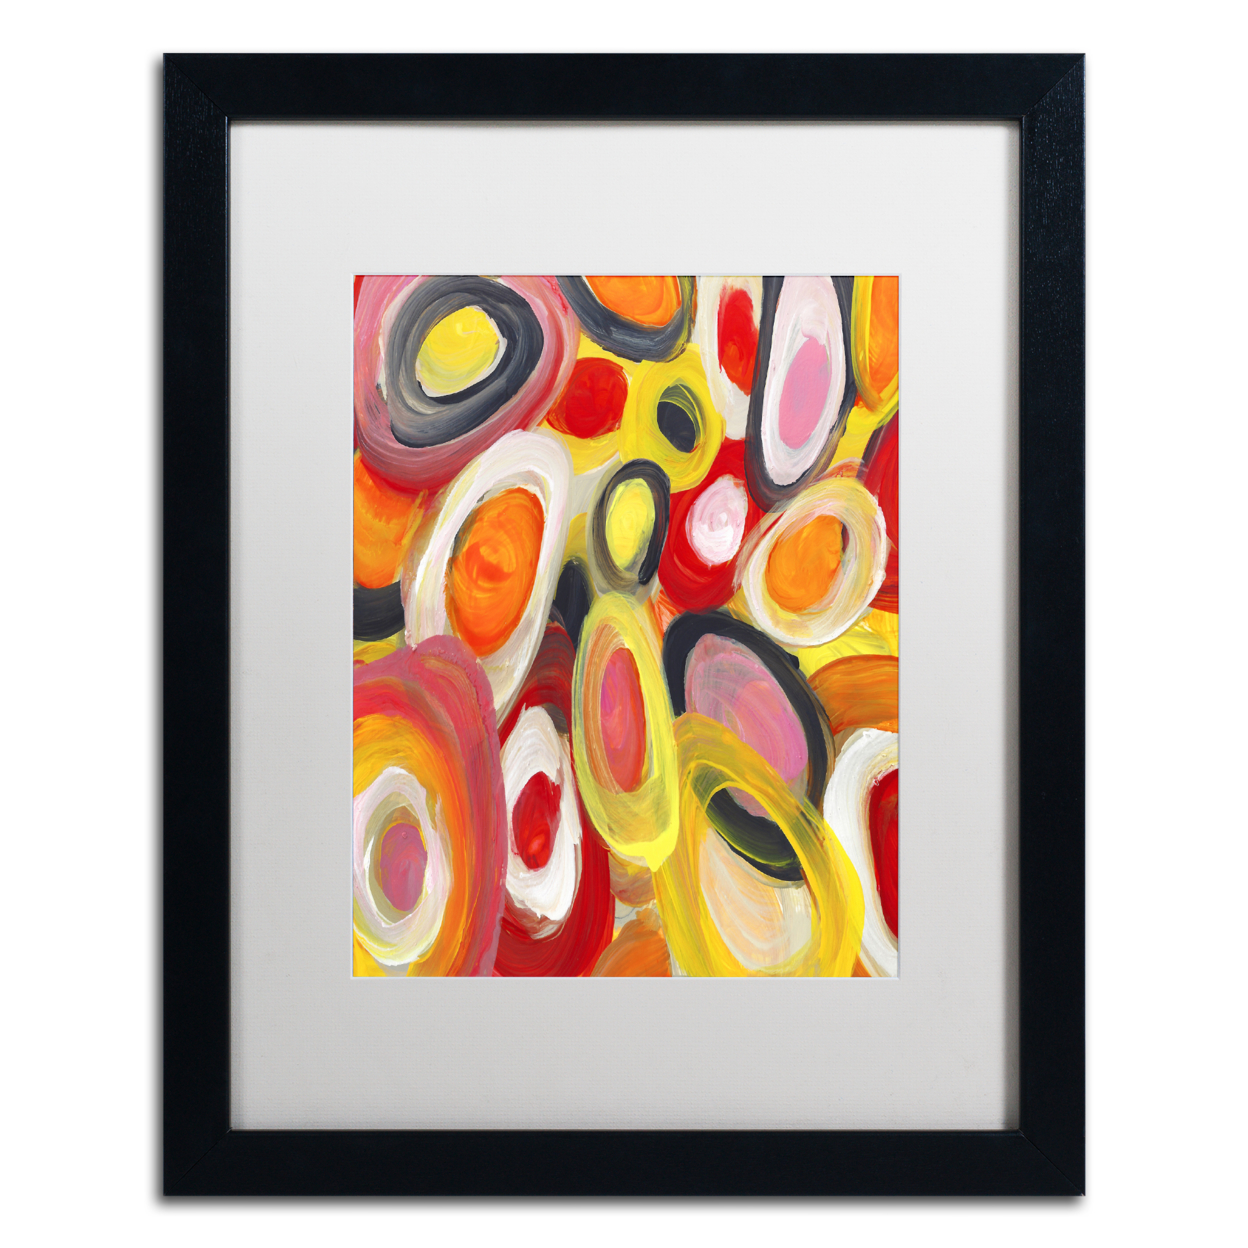 Amy Vangsgard 'Colorful Abstract Circles 4' Black Wooden Framed Art 18 X 22 Inches